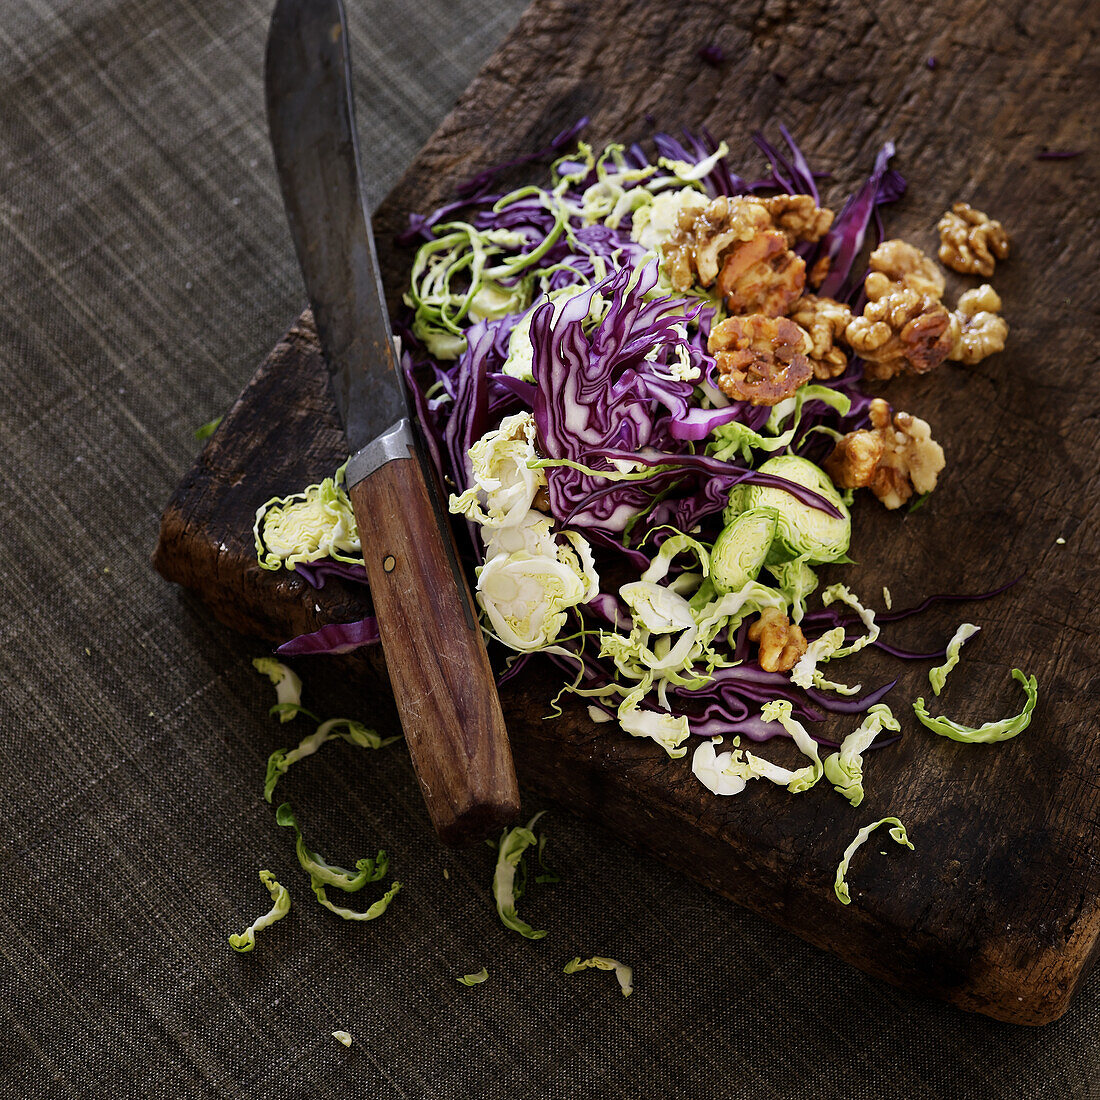 Cabbage salad with walnuts